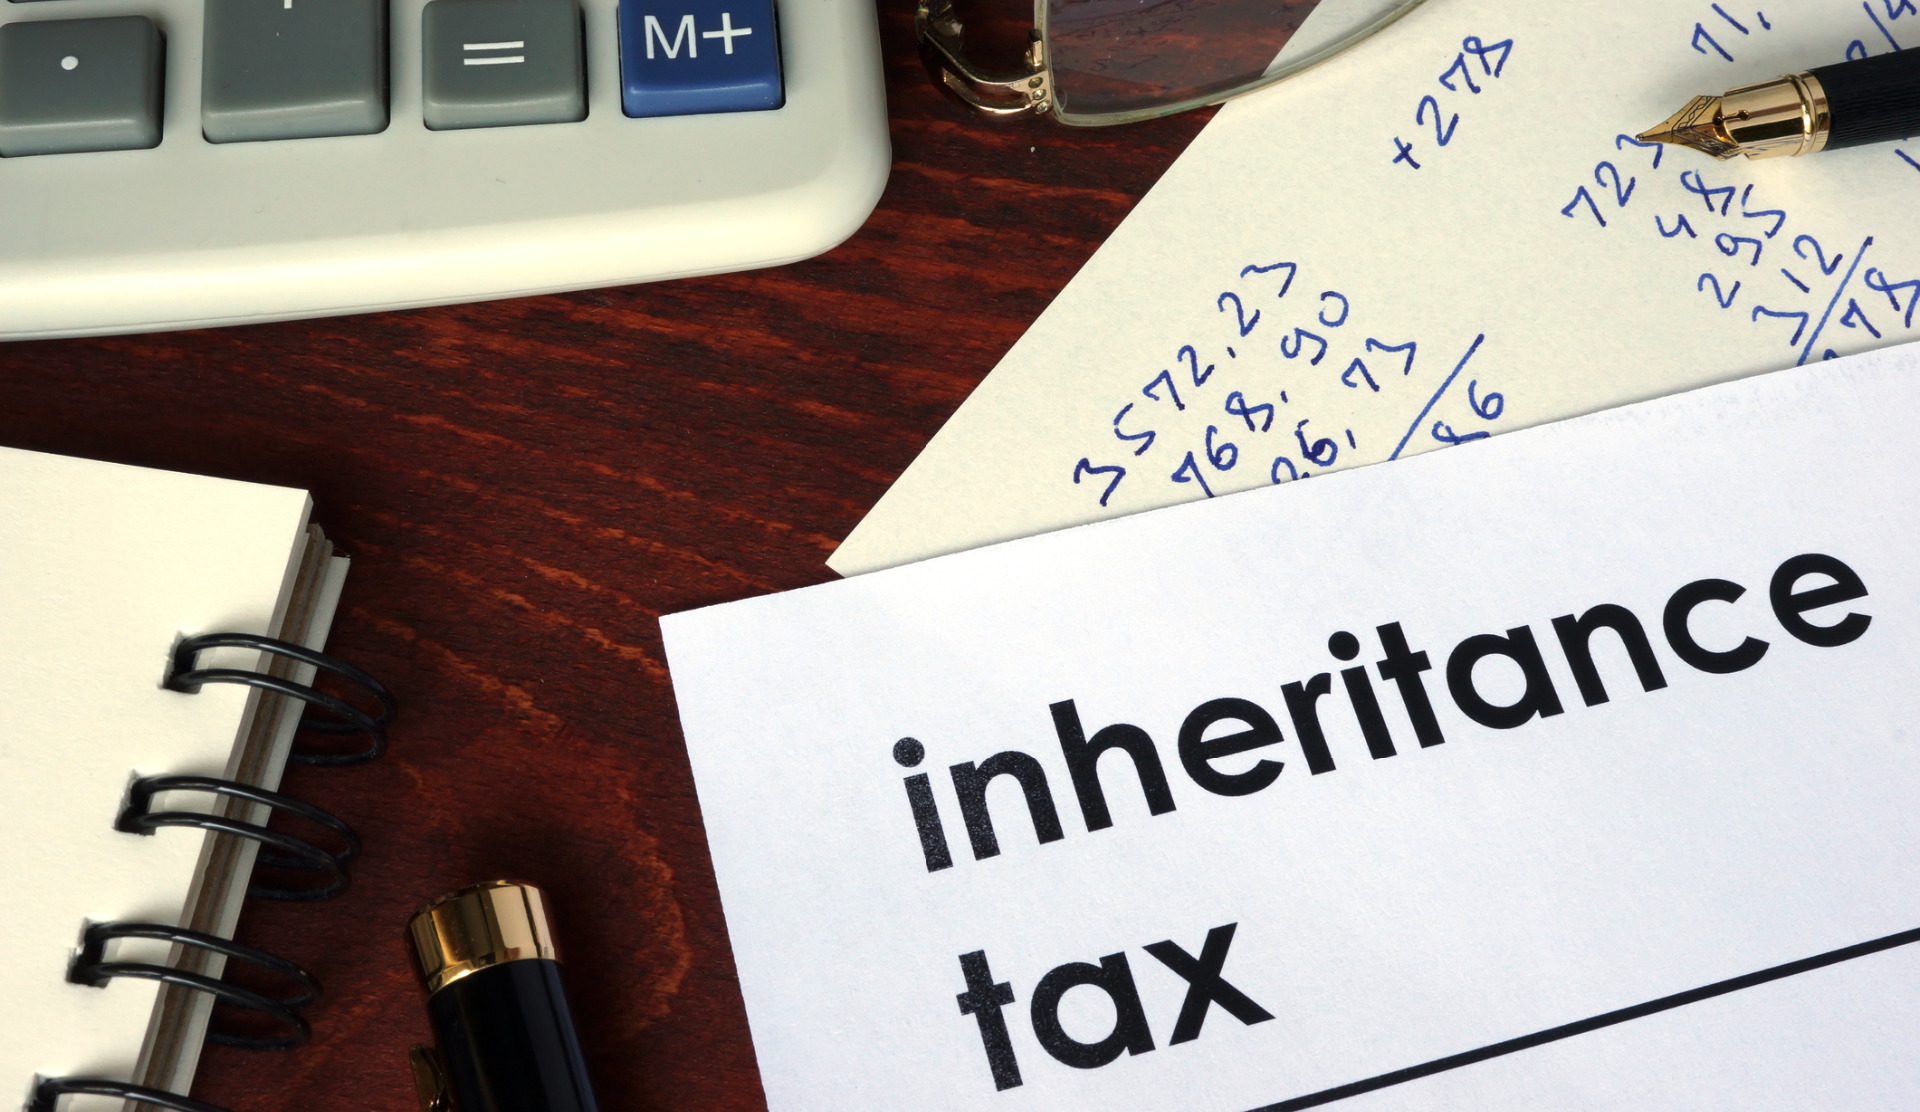 A form saying 'Inheritance Tax' and a pile of papers underneath with workings out, and the edge of a notebook, a calculator and some glasses.